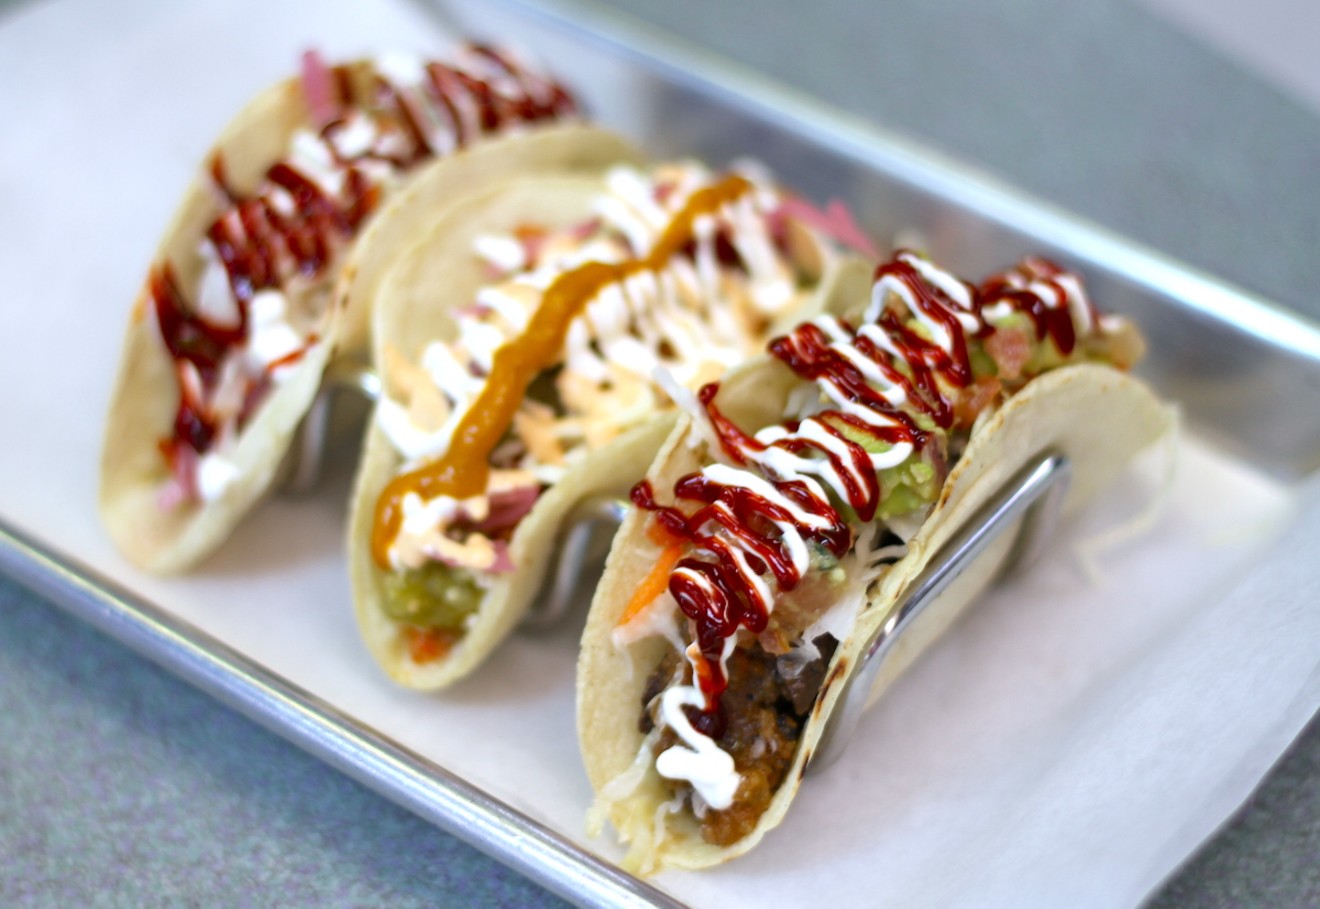 South Florida's best tacos can be found at a gas station in Parkland.